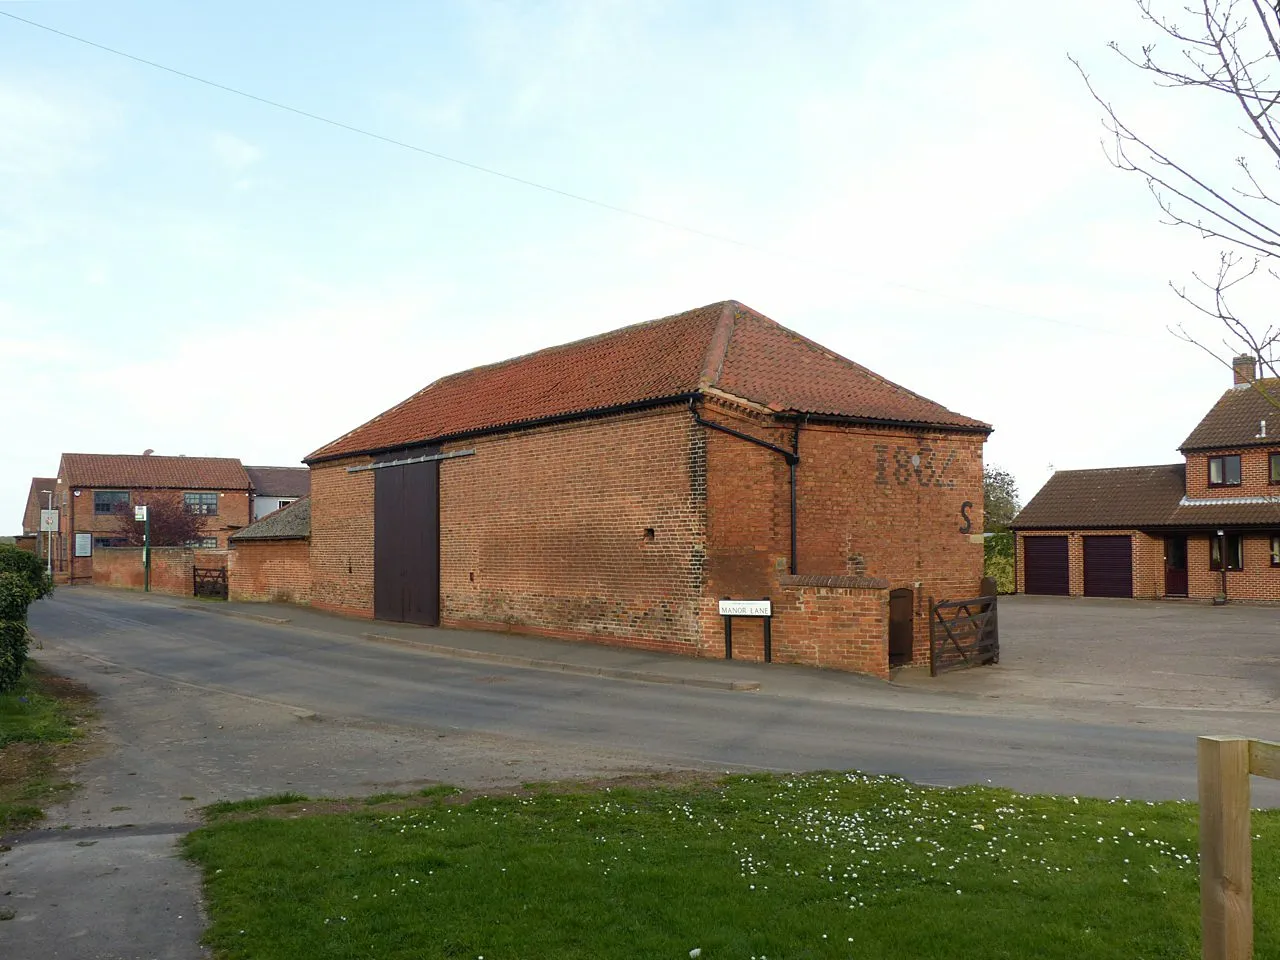 Photo showing: Photograph of the barn at Water Lane Farm, Shelford, Nottinghamshire, England